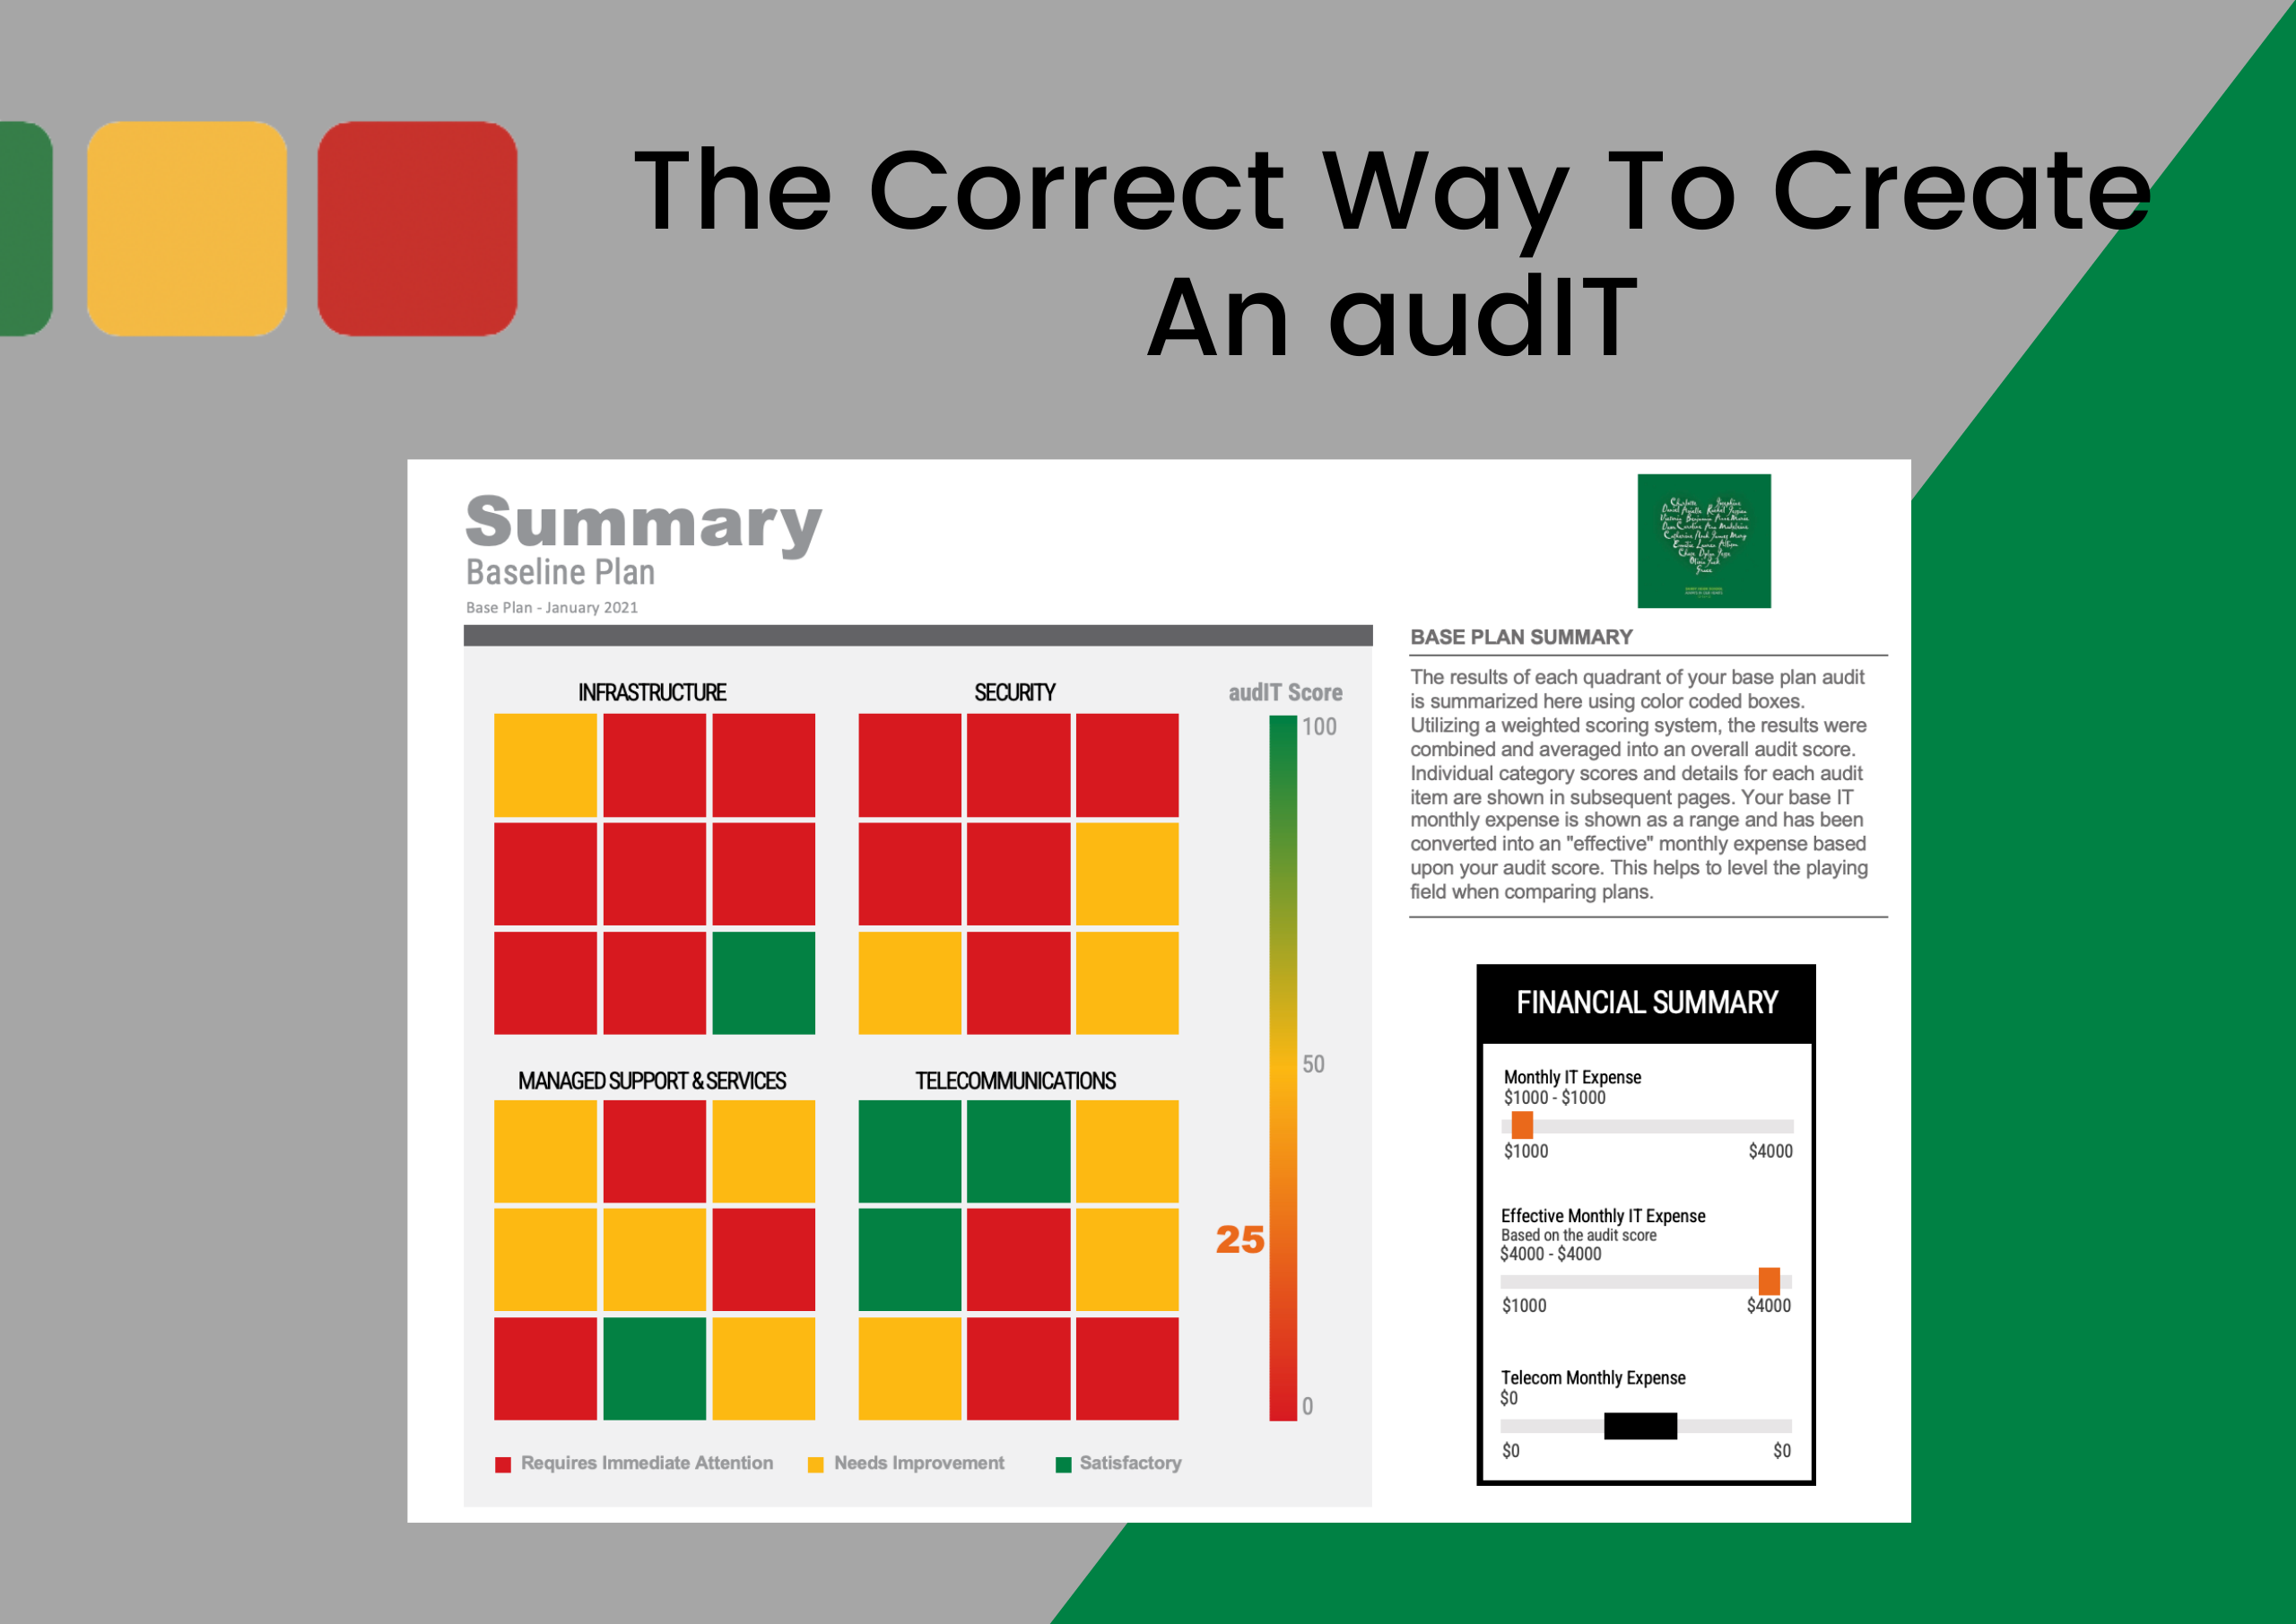 MSP-Sales-The-Correct-Way-To-Create-An-audIT-2560x1811-1